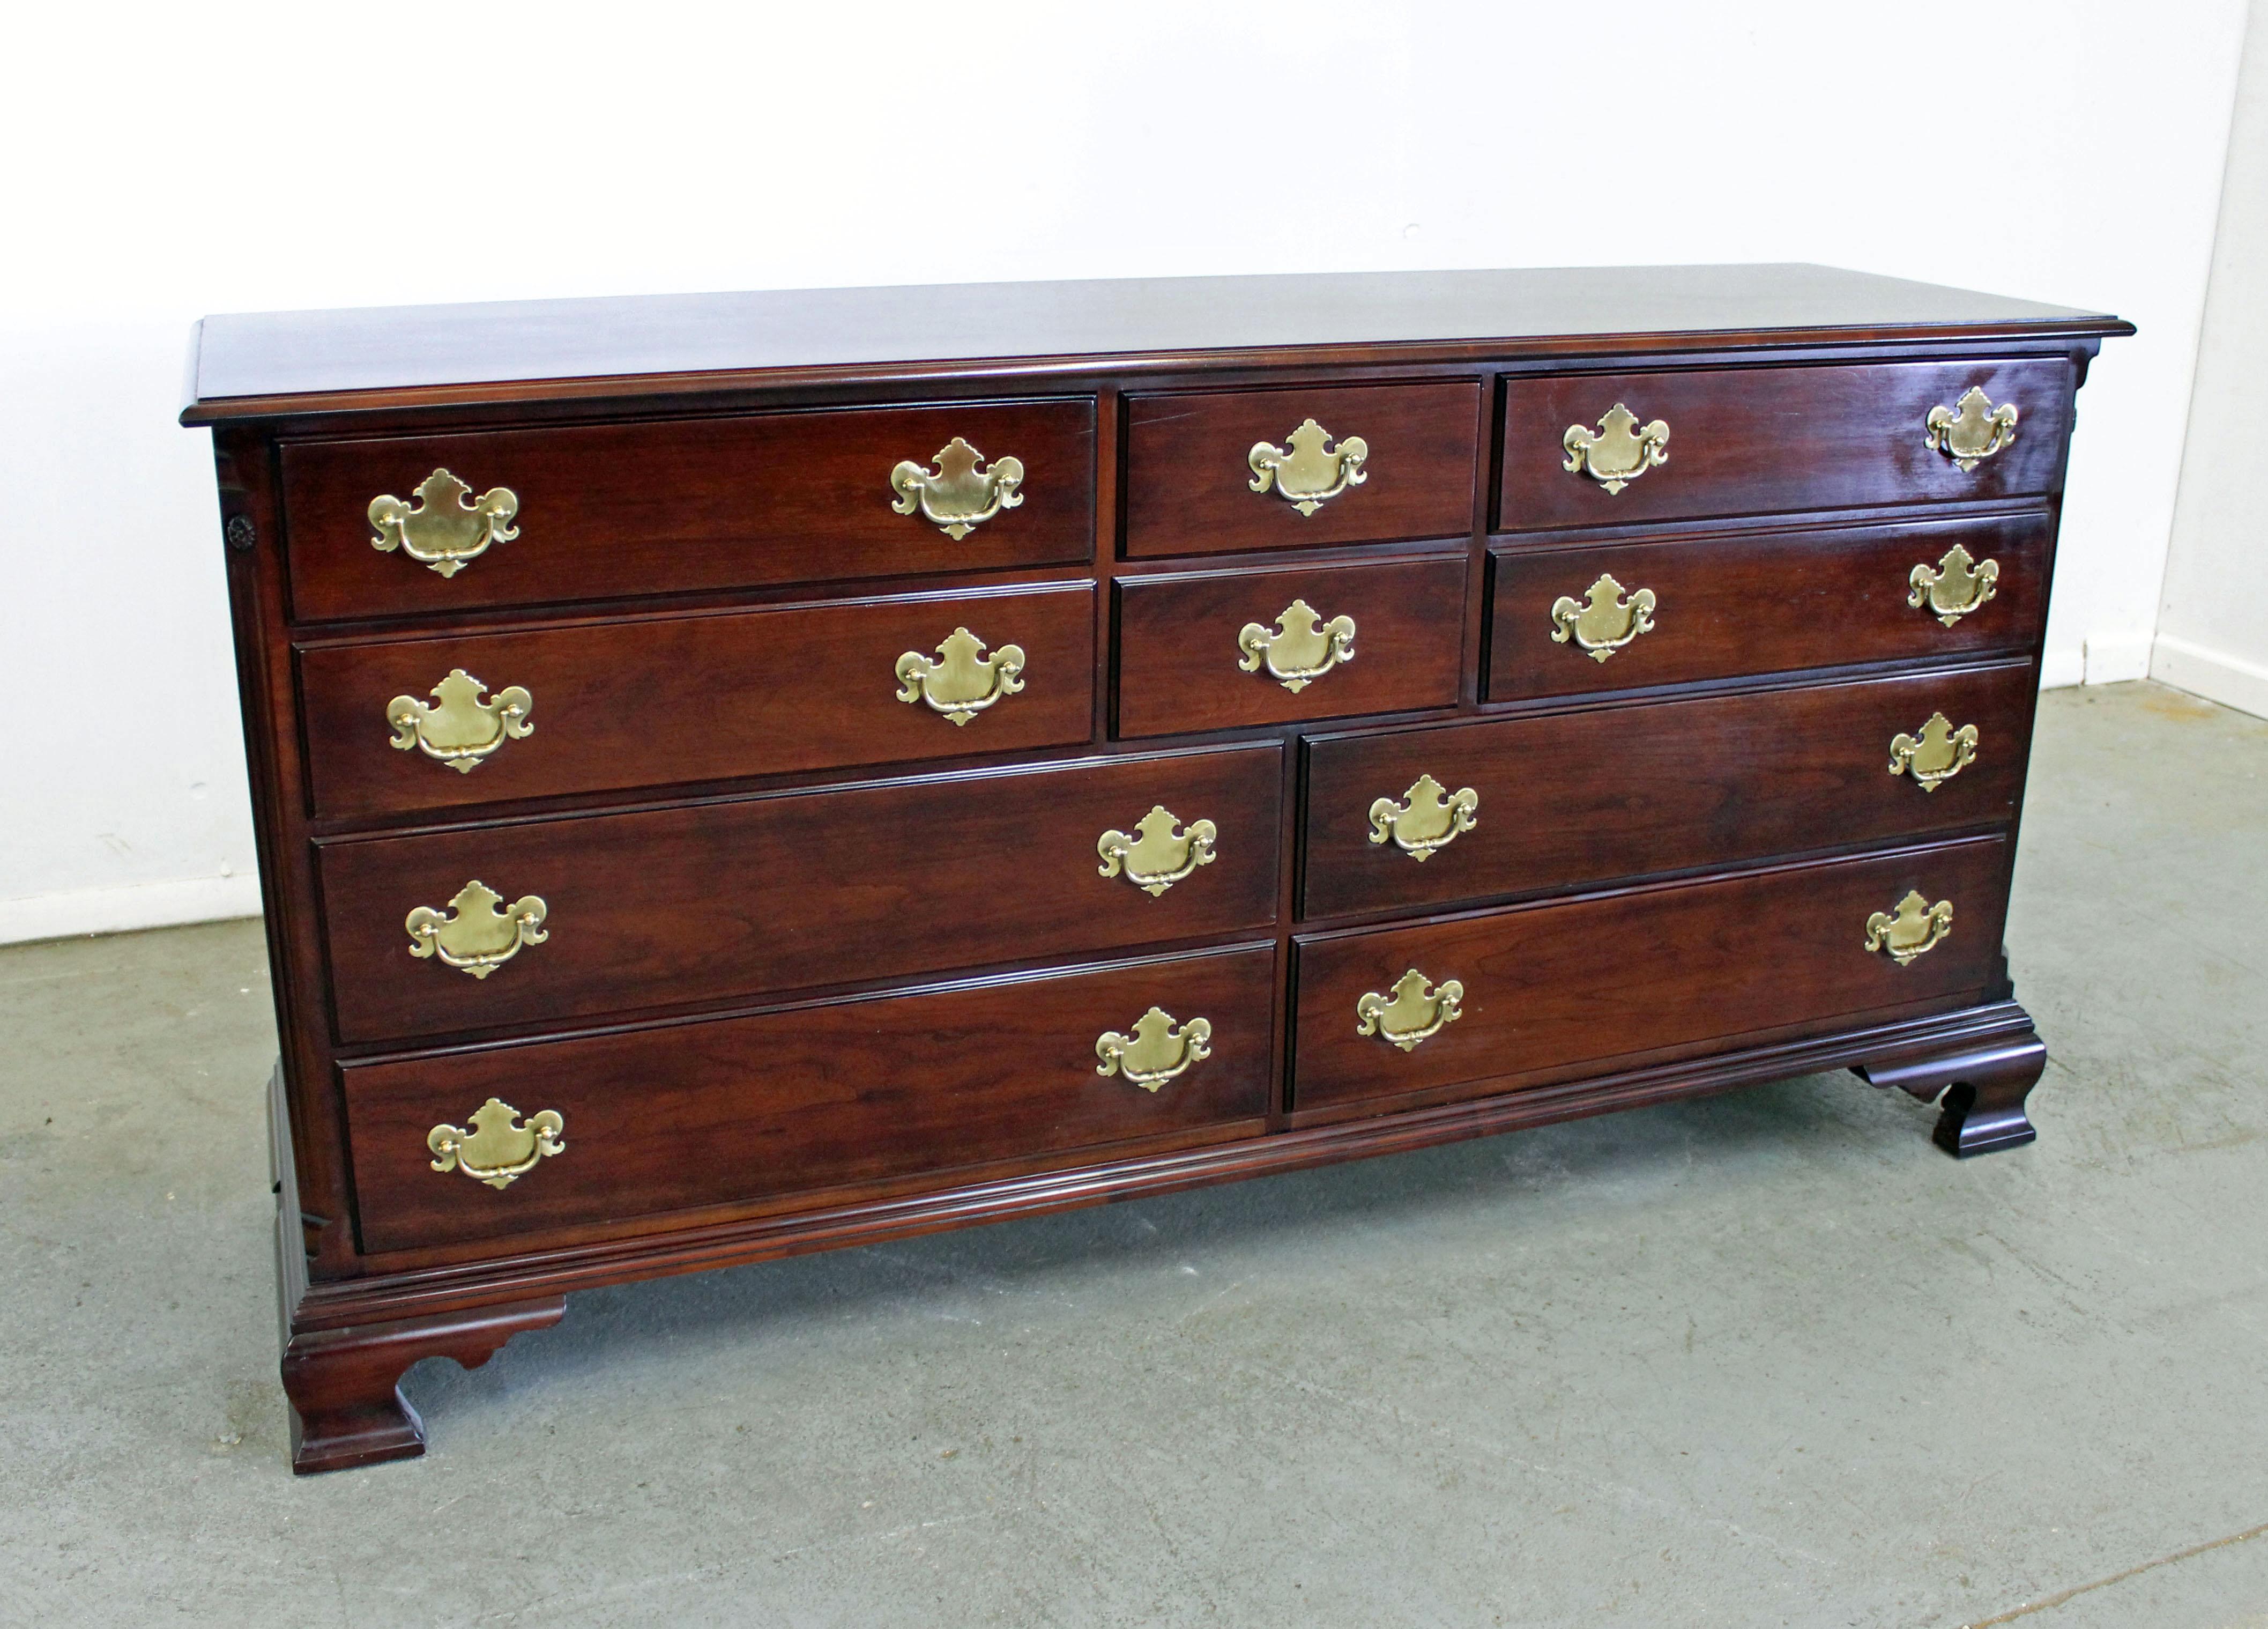 Offered is a Chippendale cherry dresser by Statton old town. Features 10 dovetailed drawers with gold tone pulls. It is in good condition, shows some signs of wear (age wear, wear on pulls, surface scratches- see photos), but nothing overly